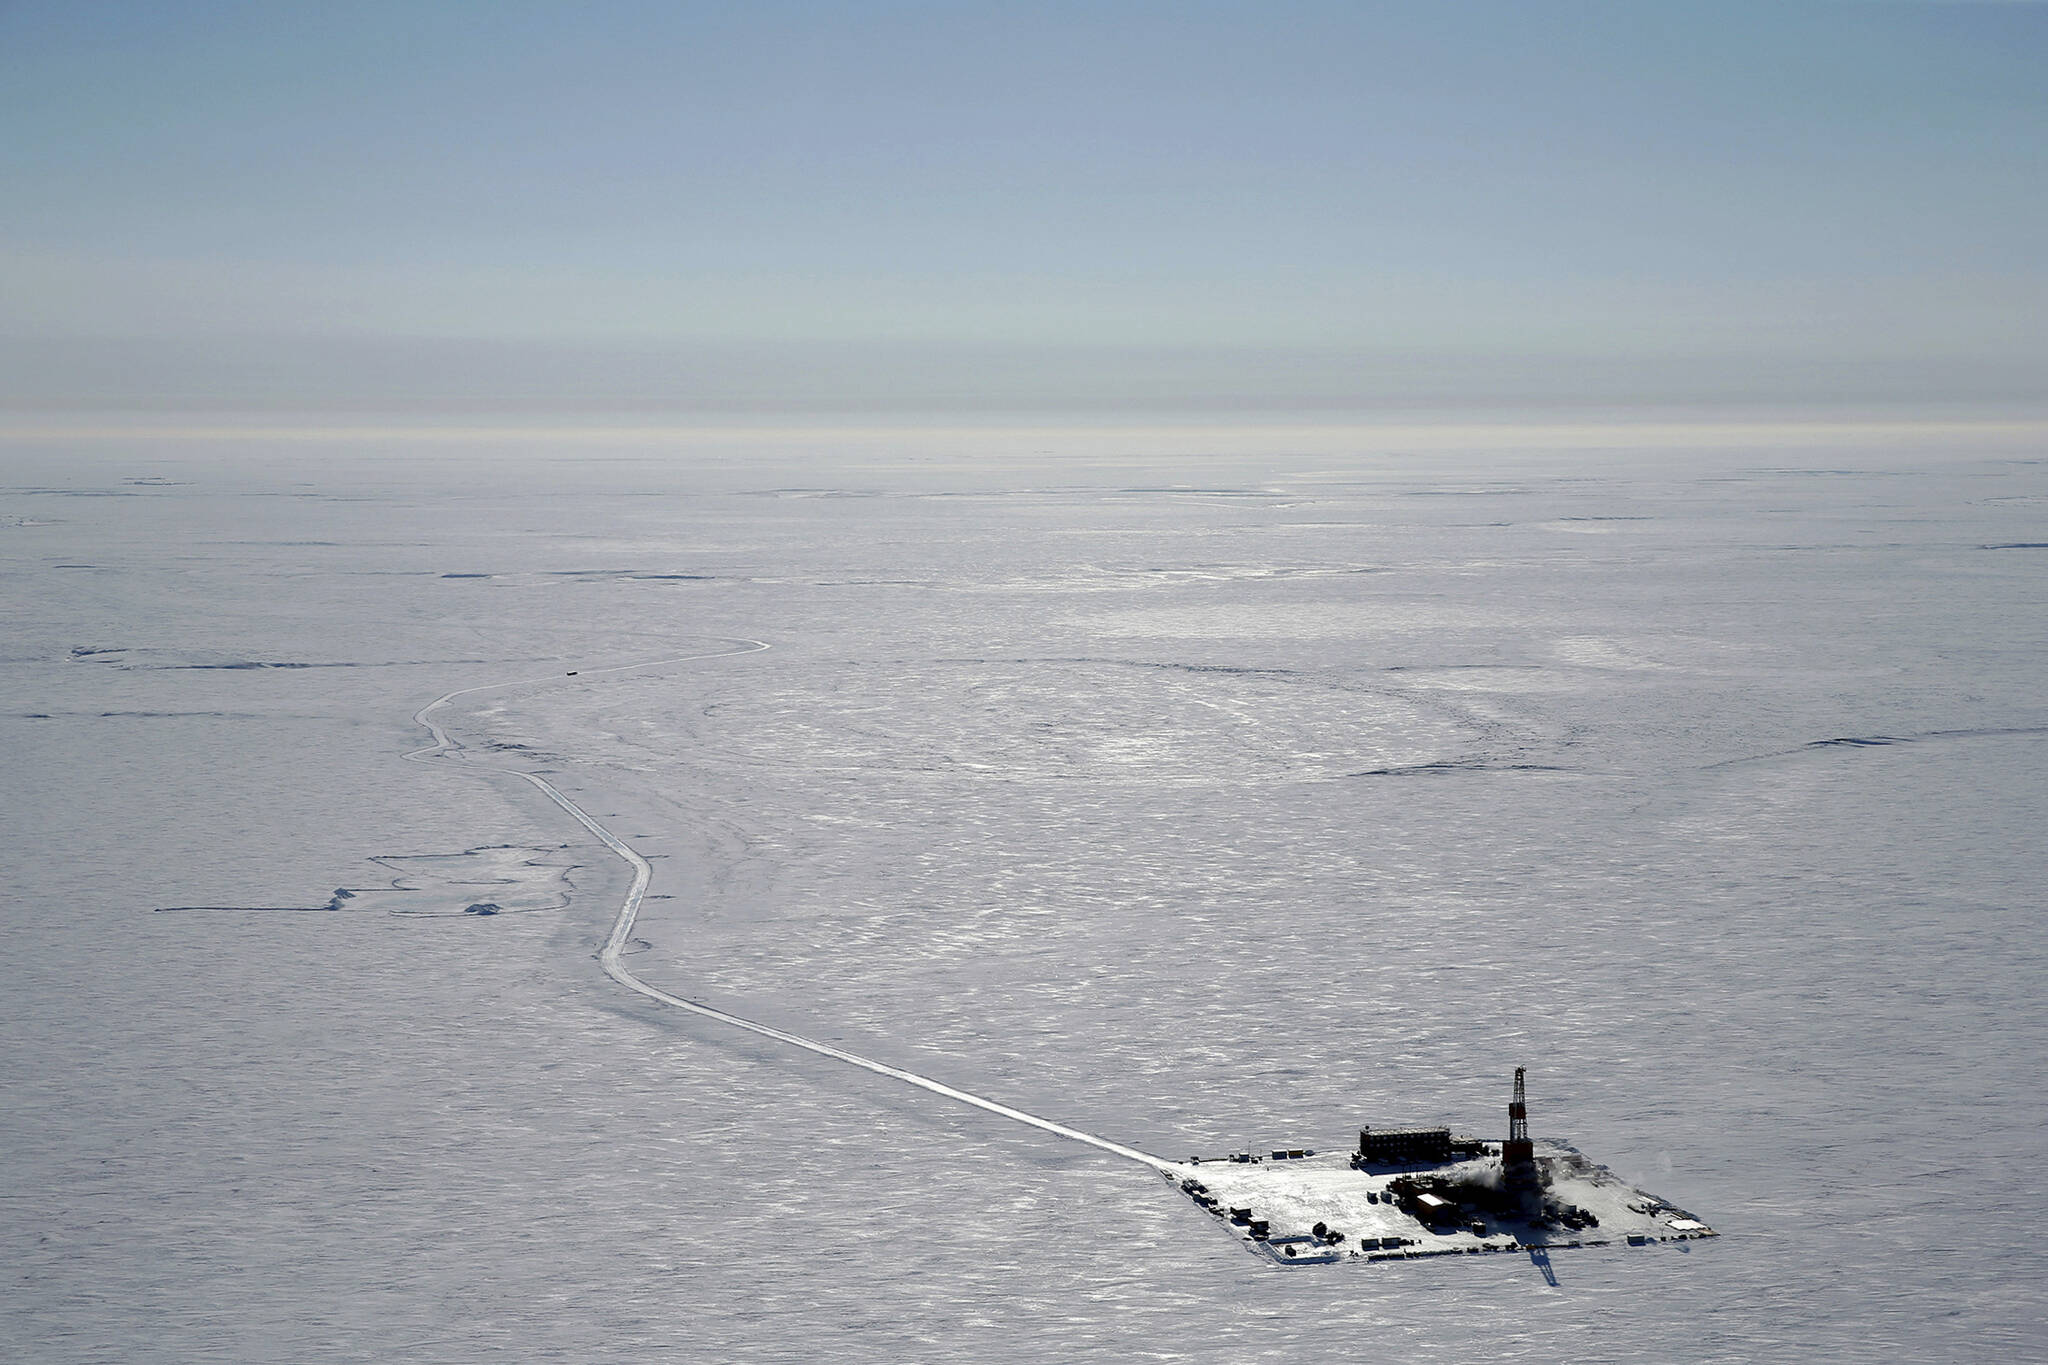 This 2019 aerial photo provided by ConocoPhillips shows an exploratory drilling camp at the proposed site of the Willow oil project on Alaska's North Slope. Pressure is building on the social media platform TikTok to urge President Joe Biden to reject an oil development project on Alaska's North Slope from young voters concerned about climate change. That's blunted by Alaska Native leaders who support ConocoPhillips' development called Willow. (ConocoPhillips)